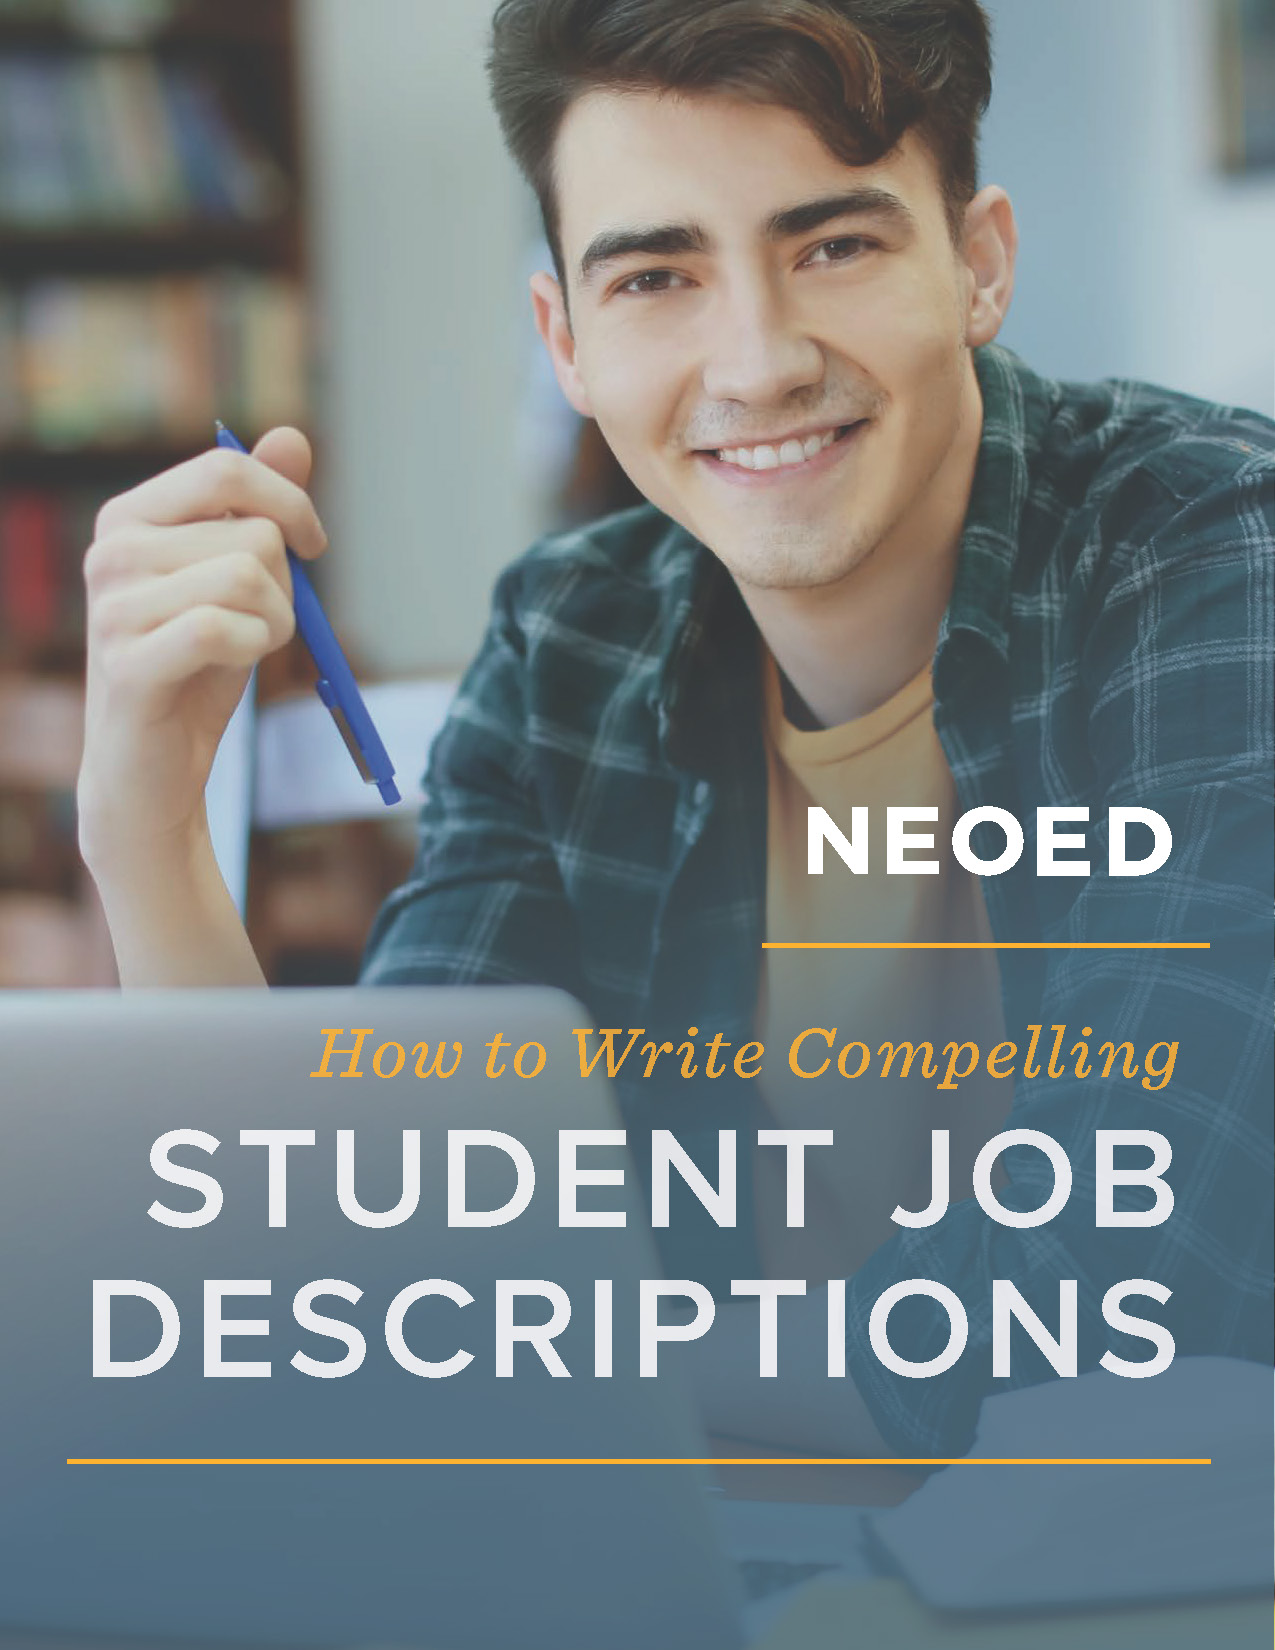 NEOED-How to Write Compelling Student Job Descriptions_Page_1